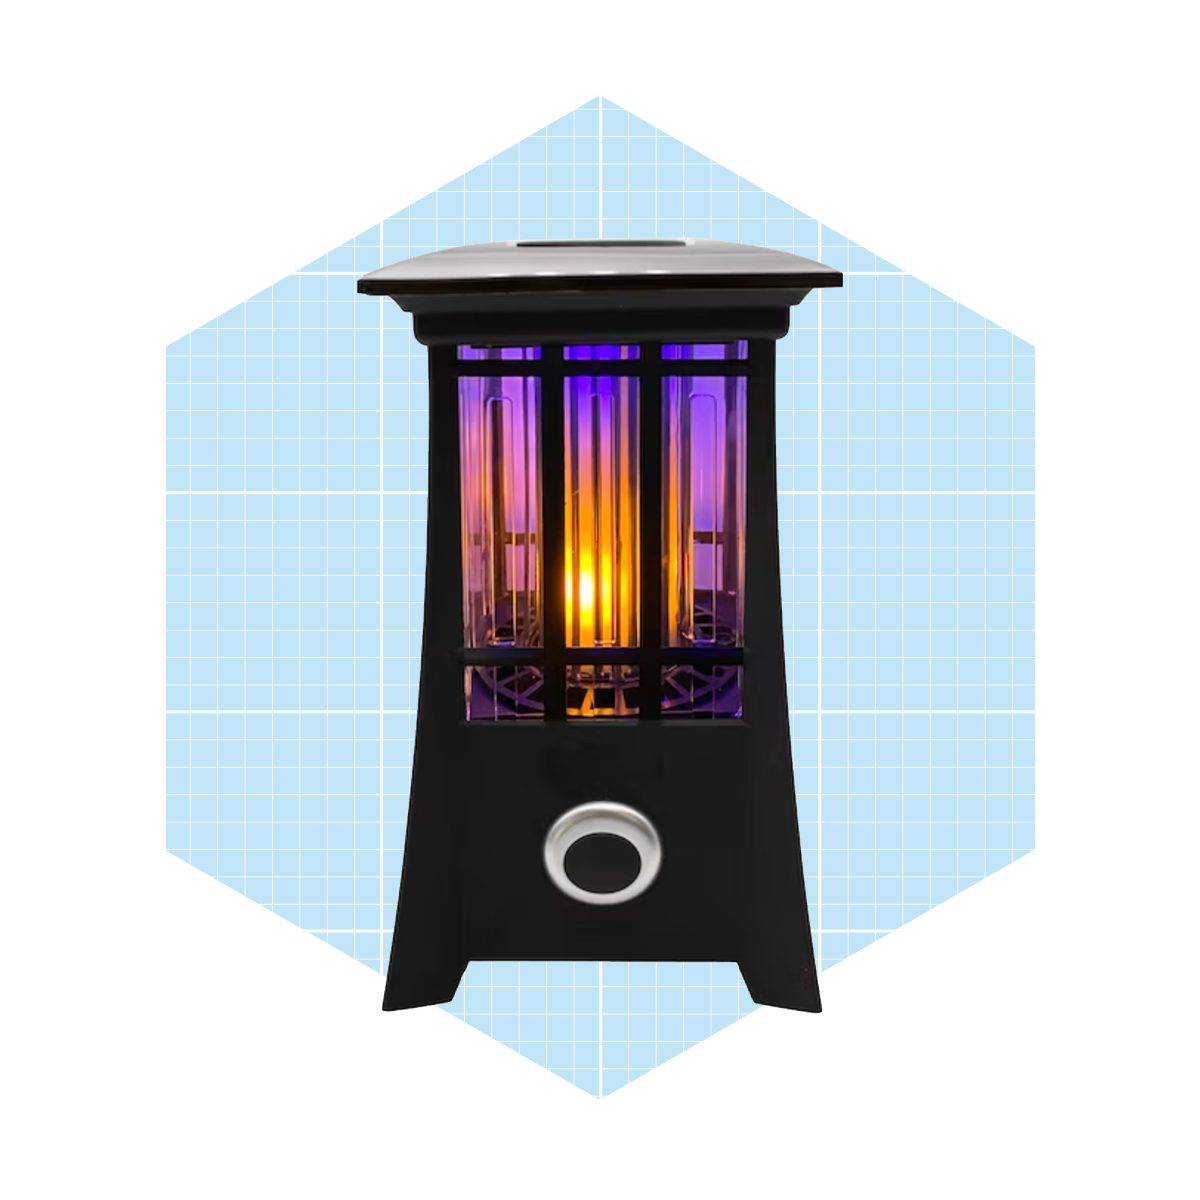 https://www.familyhandyman.com/wp-content/uploads/2023/04/PIC-Patio-Lantern-Outdoor-Insect-TrapPIC-Patio-Lantern-Outdoor-Insect-Trap-ecomm-lowes.com_.jpg?fit=700%2C700